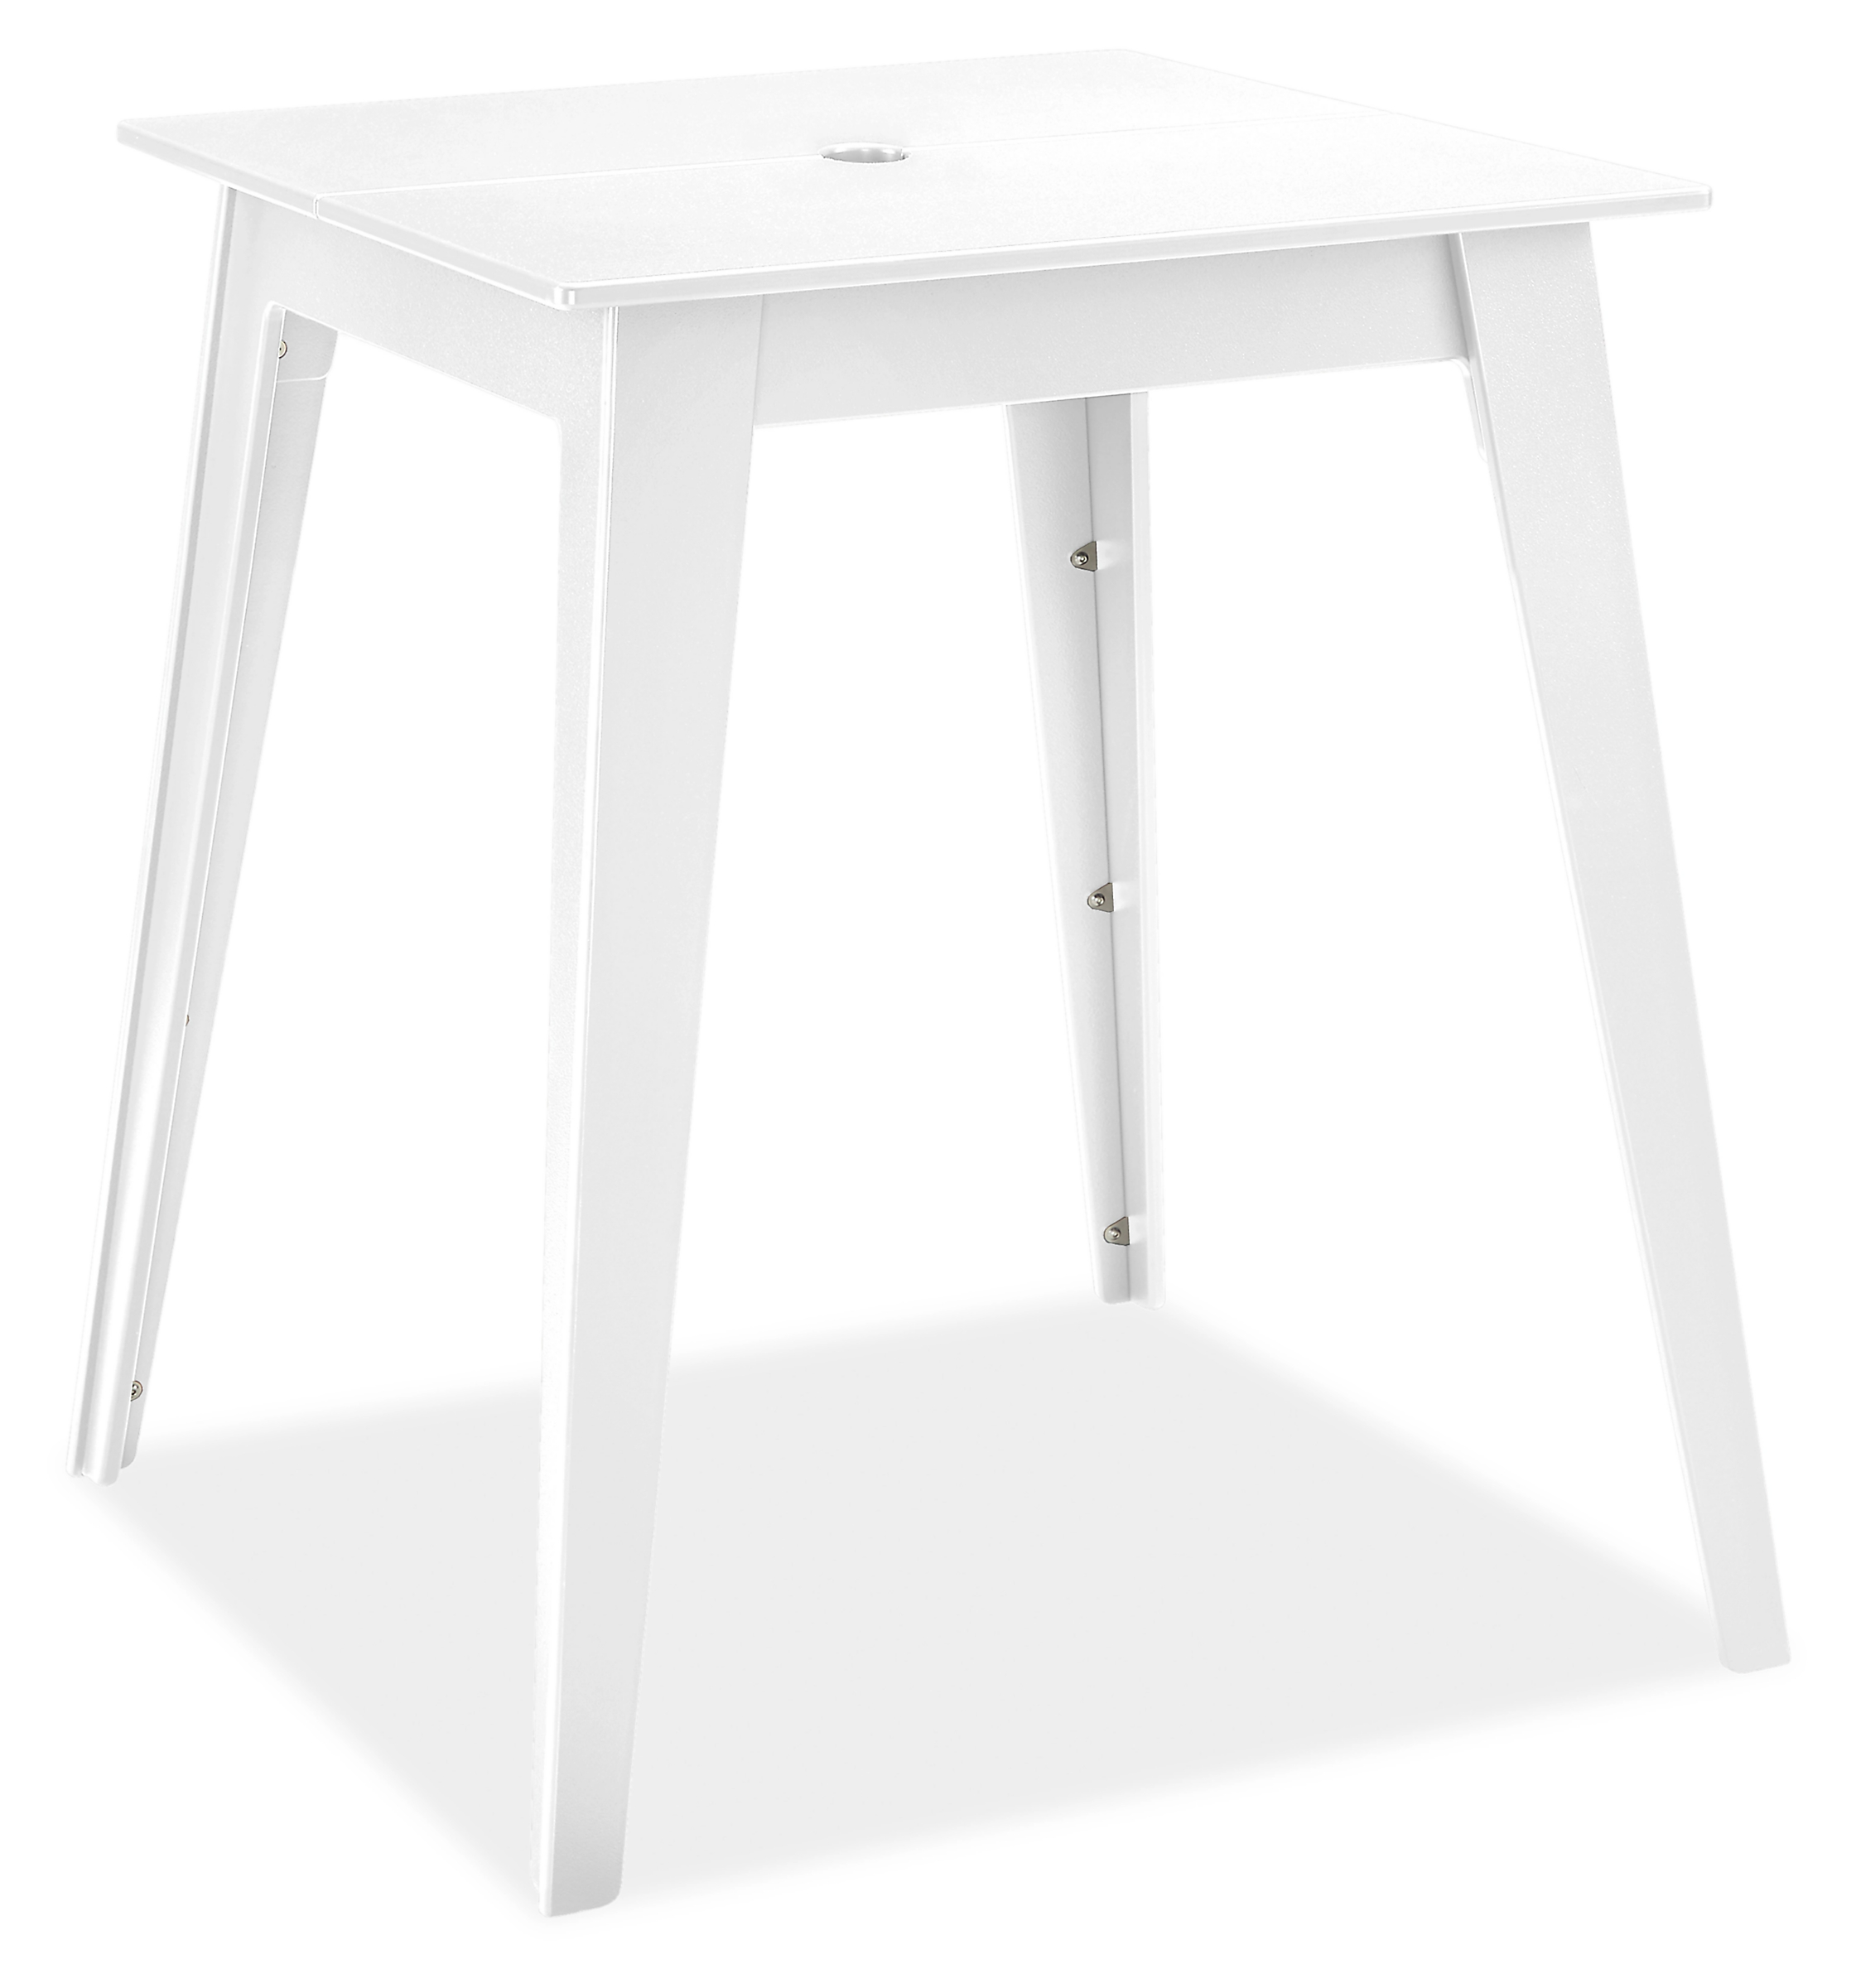 Aspen 32w 32d 36h Counter Table with Umbrella Hole